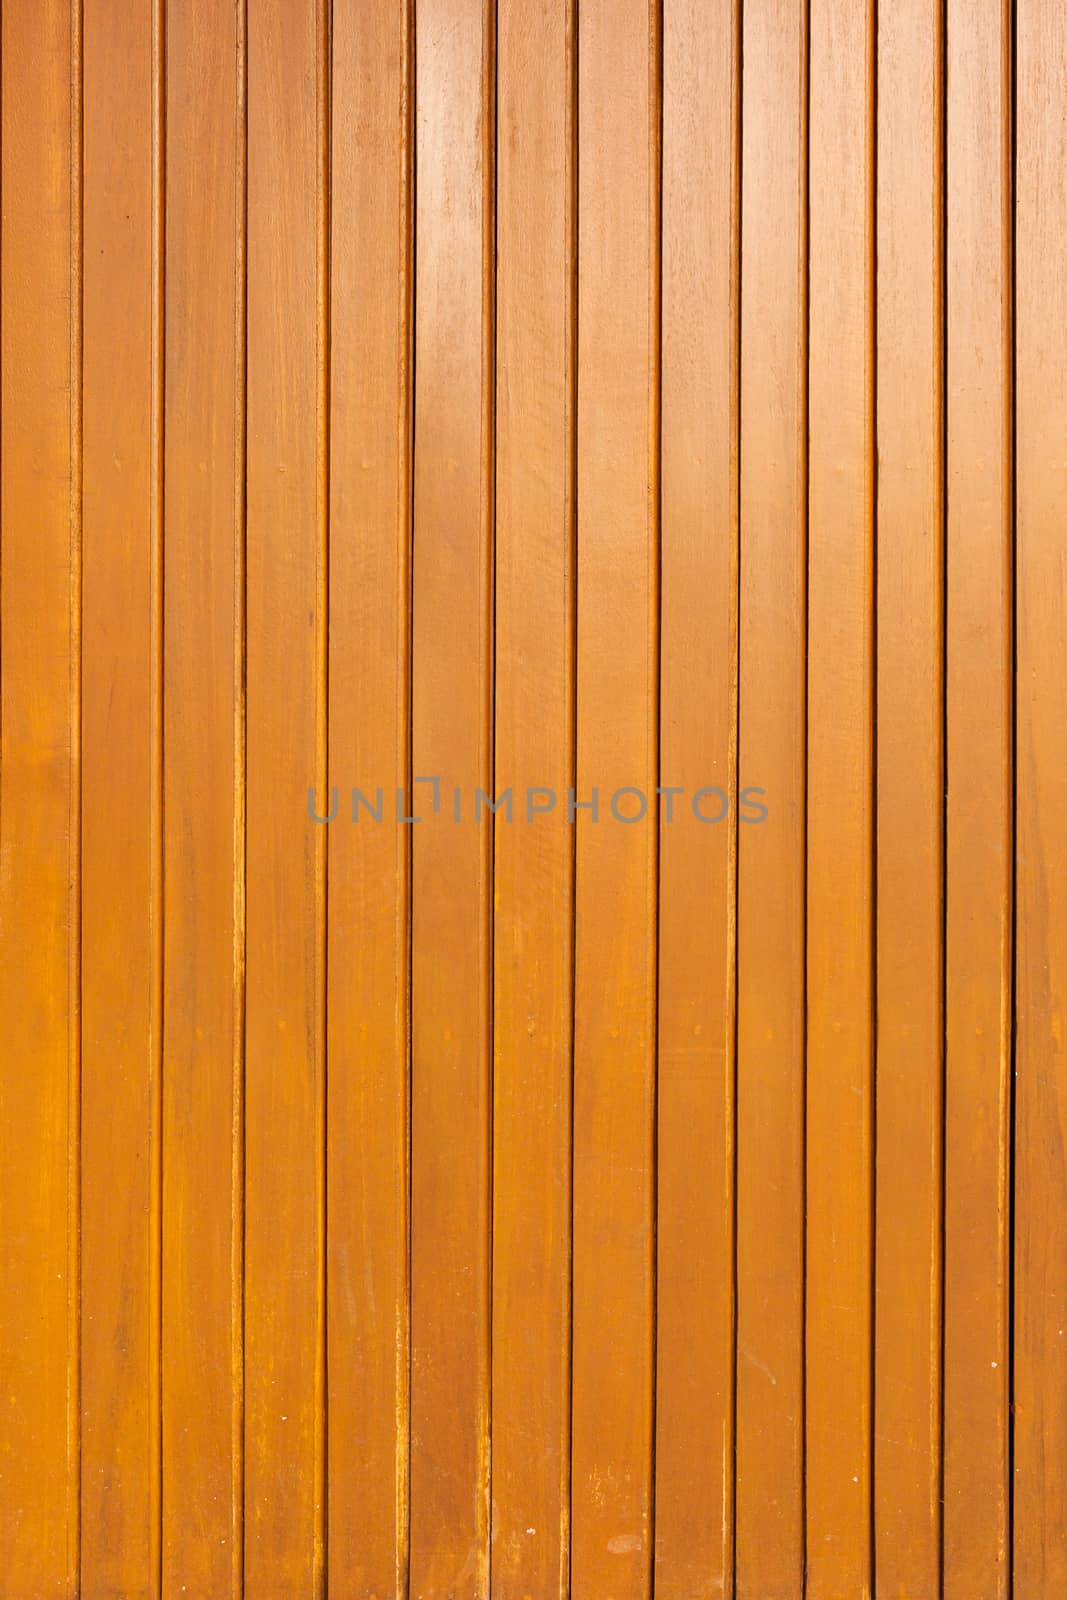 Brown wood plank wall texture background.